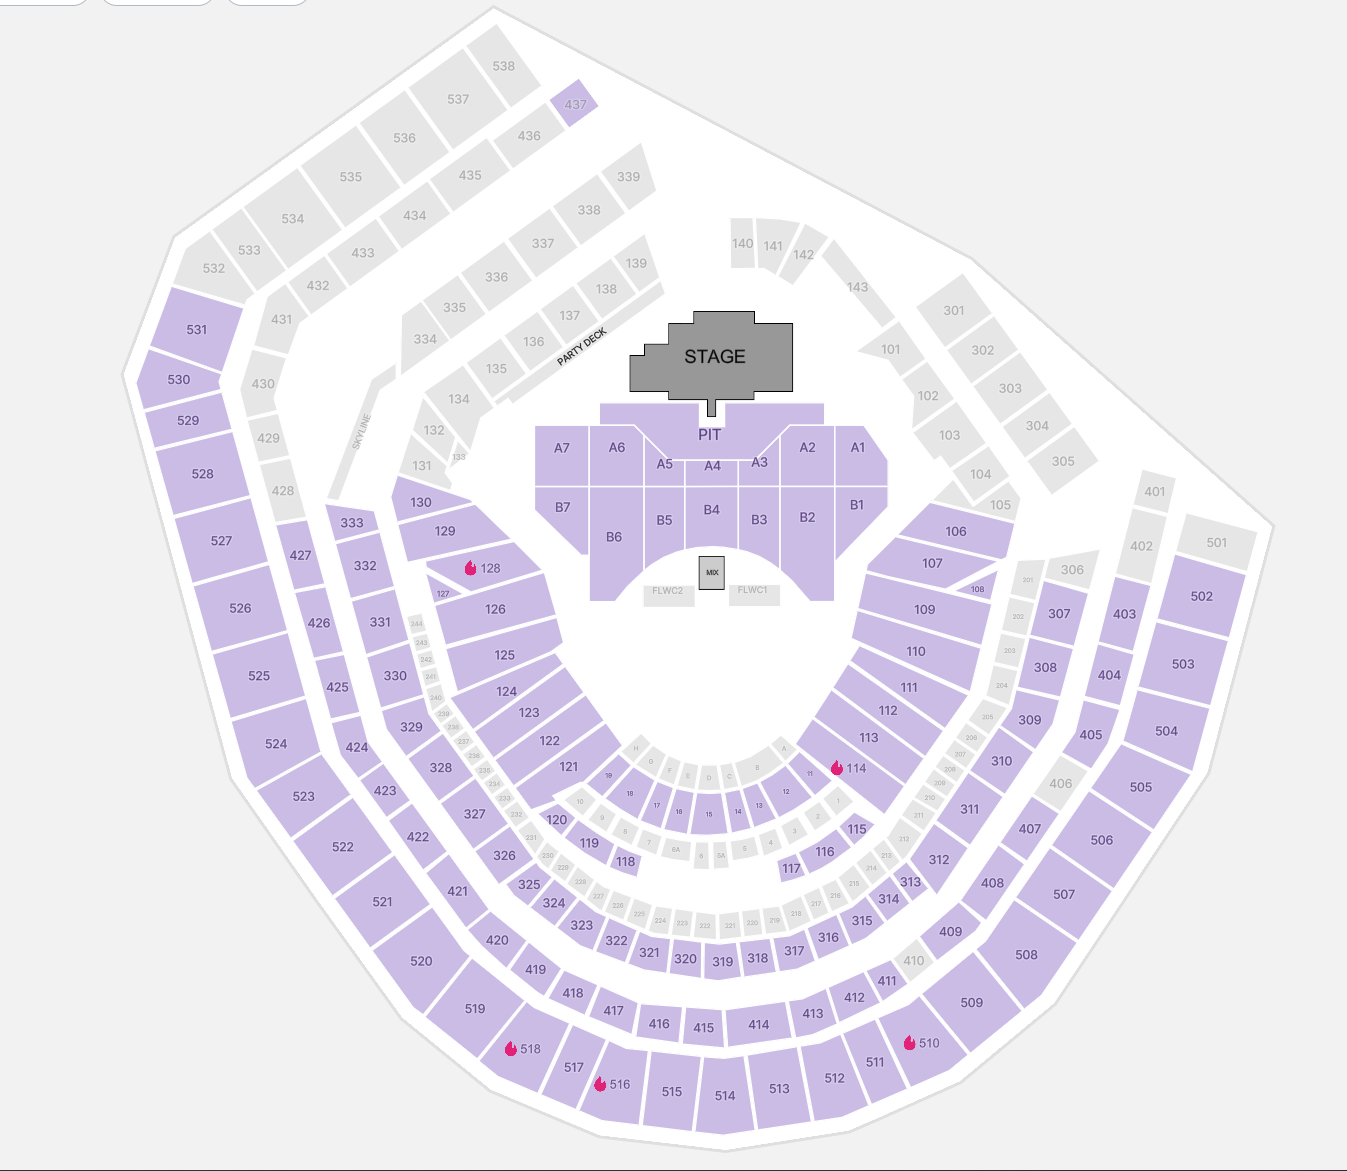 Tickets range from $95 to $540 at Citi Field and over $4,000 in the pit